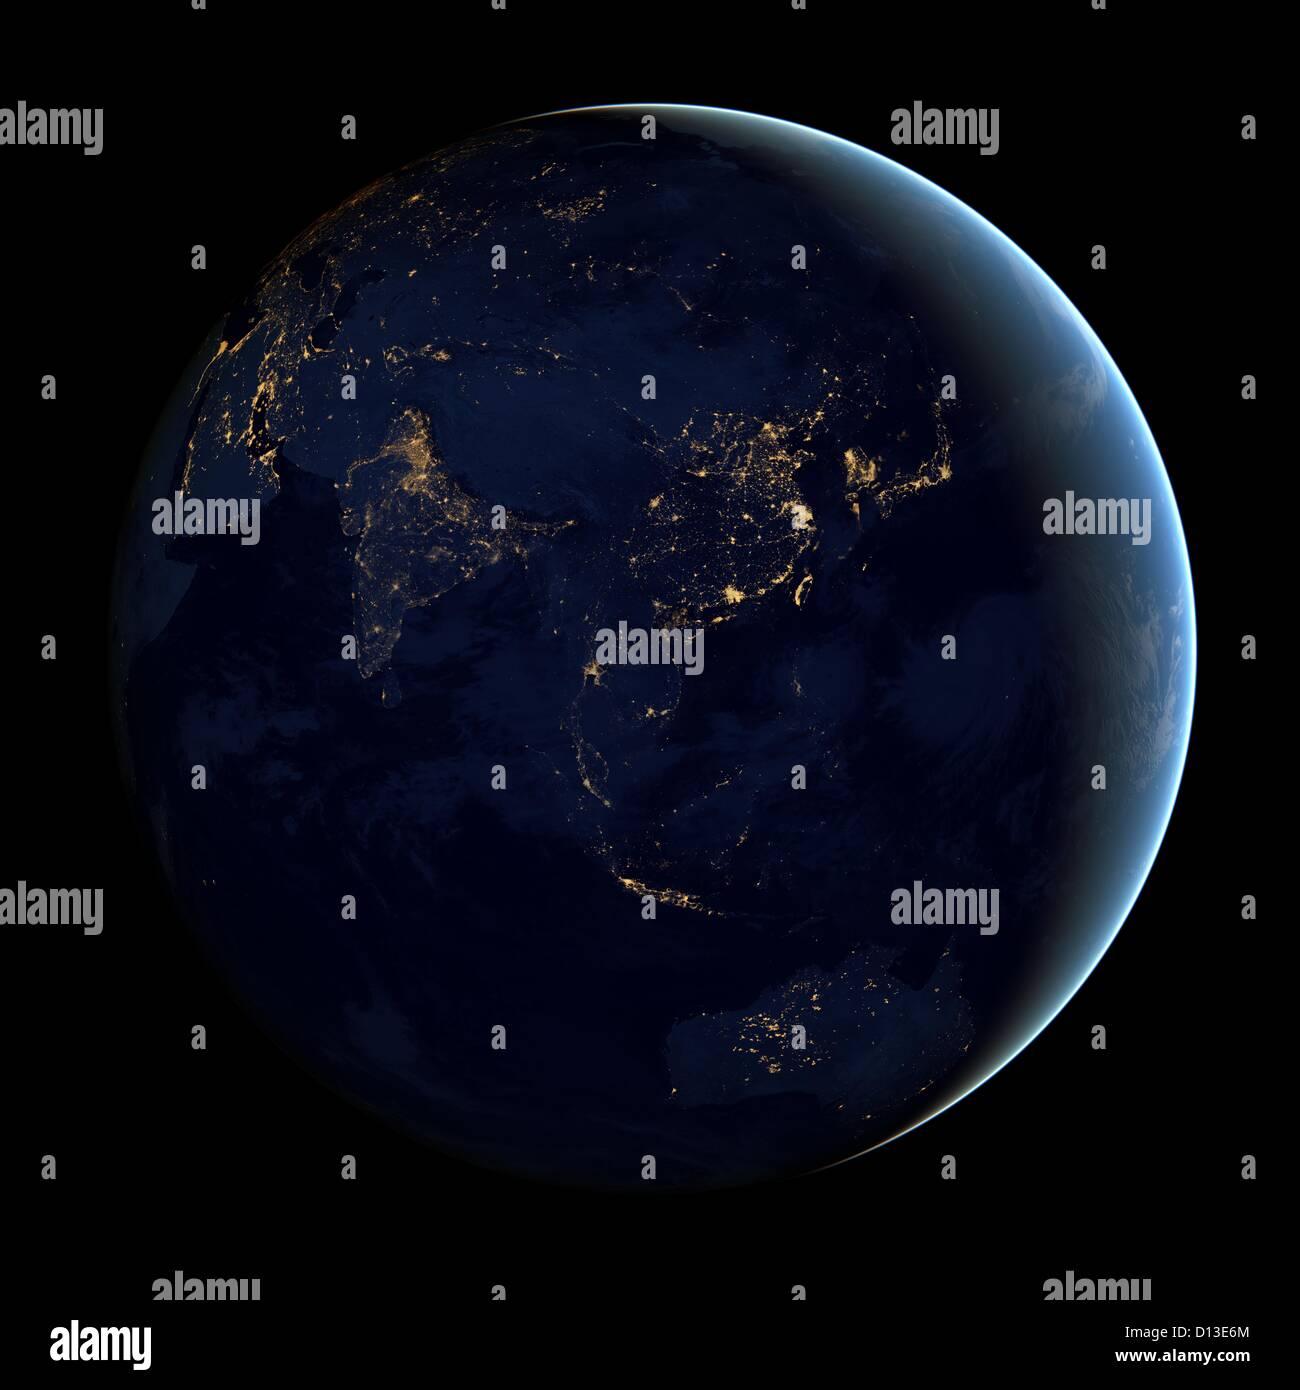 Composite image of Asia and Australia at night as seen from the Suomi NPP satellite orbiting earth from April and October 2012. The new data was mapped over existing Blue Marble imagery of Earth to provide a realistic view of the planet. The nighttime view was made possible by the new satelliteÕs day-night band of the Visible Infrared Imaging Radiometer Suite. VIIRS detects light in a range of wavelengths from green to near-infrared and uses filtering techniques to observe dim signals such as city lights, gas flares, auroras, wildfires, and reflected moonlight. In this case, auroras, fires, an Stock Photo